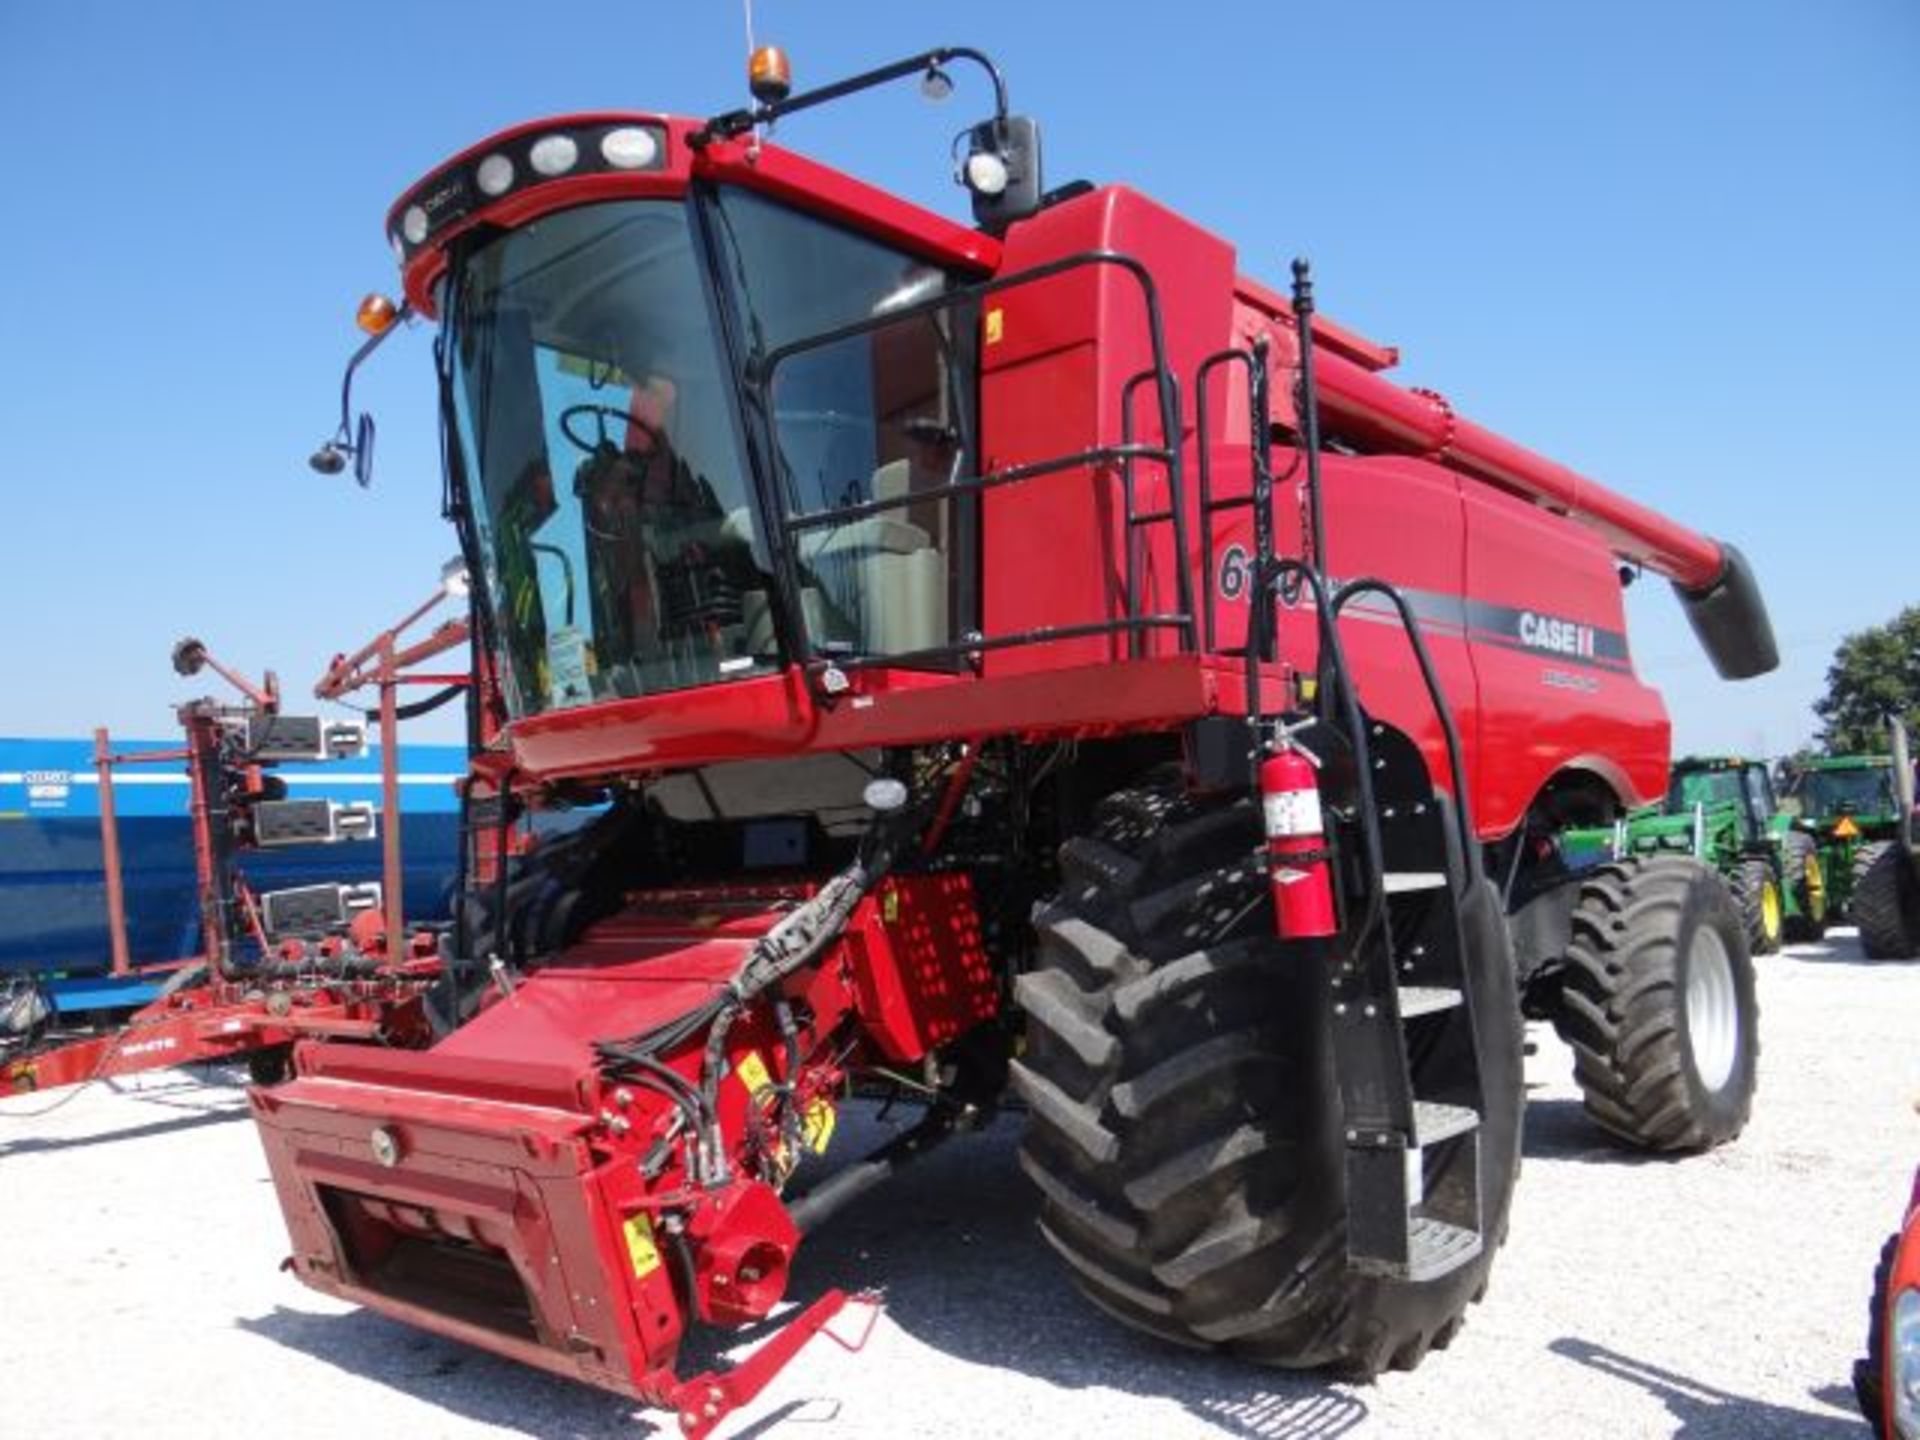 Case IH 6130 Combine, 2012 813/610 hrs, 4wd, Power Fold Cover on Grain Tank, Deluxe Cab, Guidance